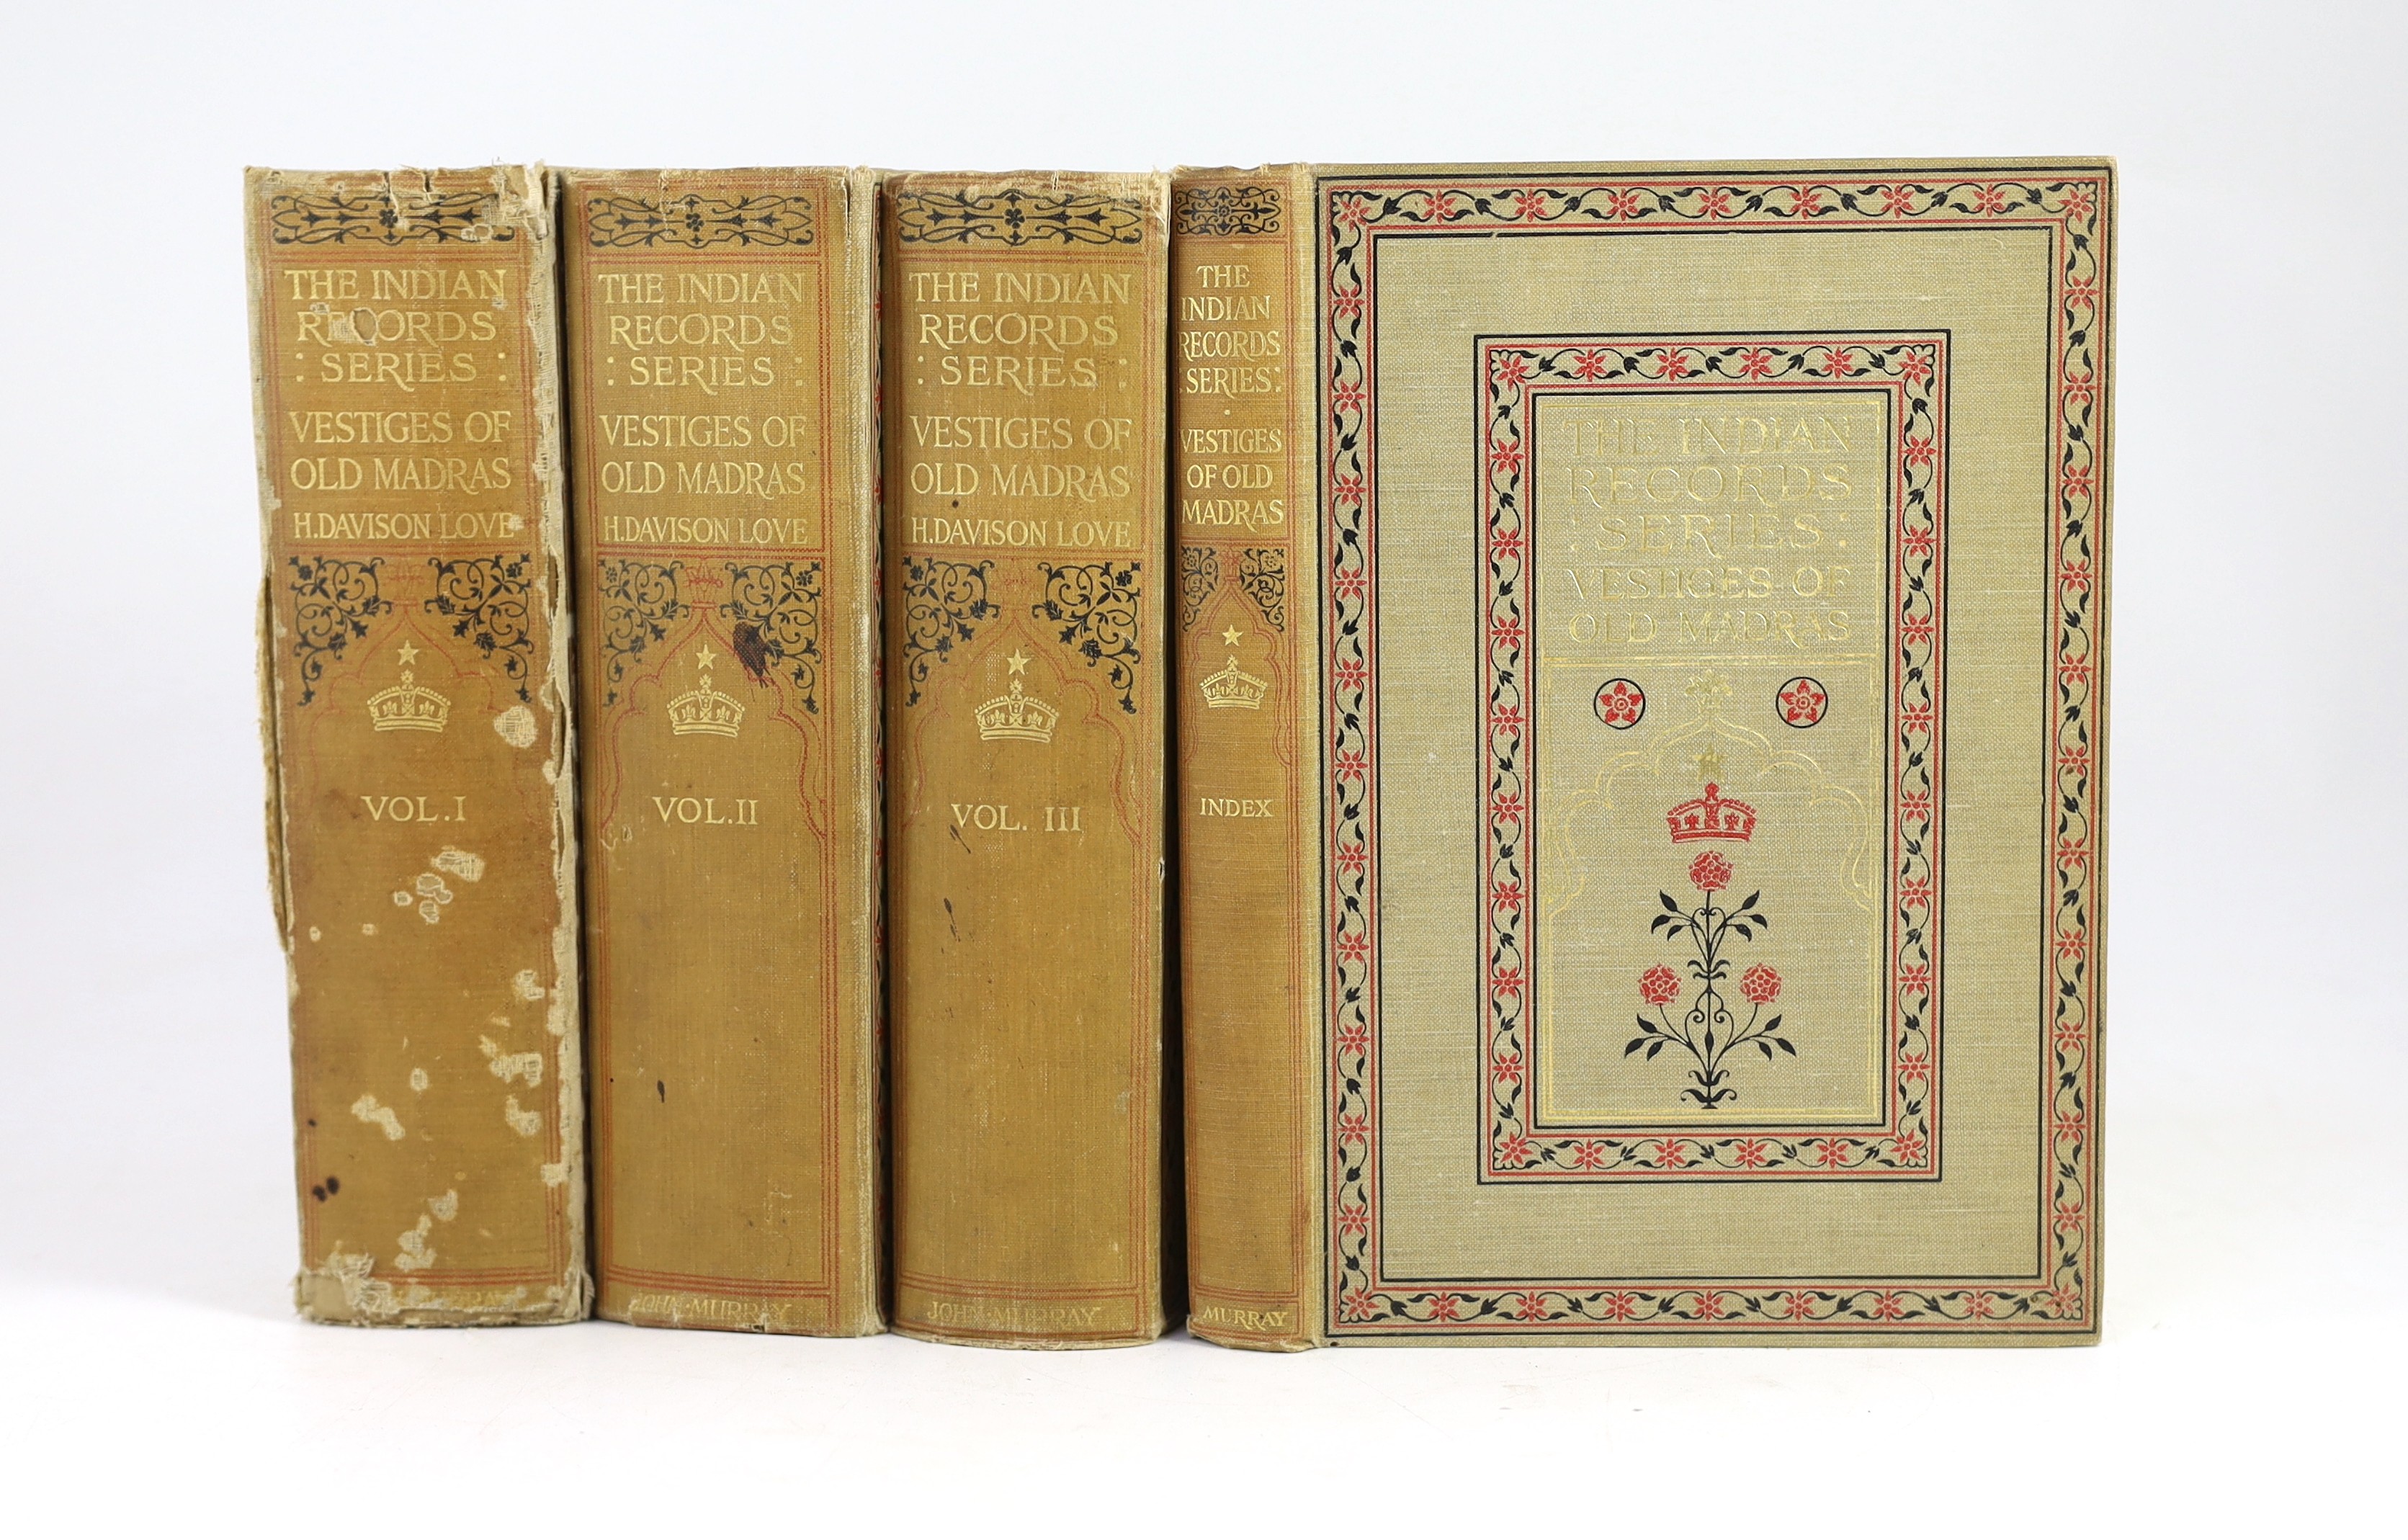 Love, Henry Davison - Indian Record Series: Vestiges of Old Madras 1640-1800, 4 vols, including index, with maps and illustrations, 8vo, decorated cloth (vol.1 covers moth eaten), John Murray, London, 1913